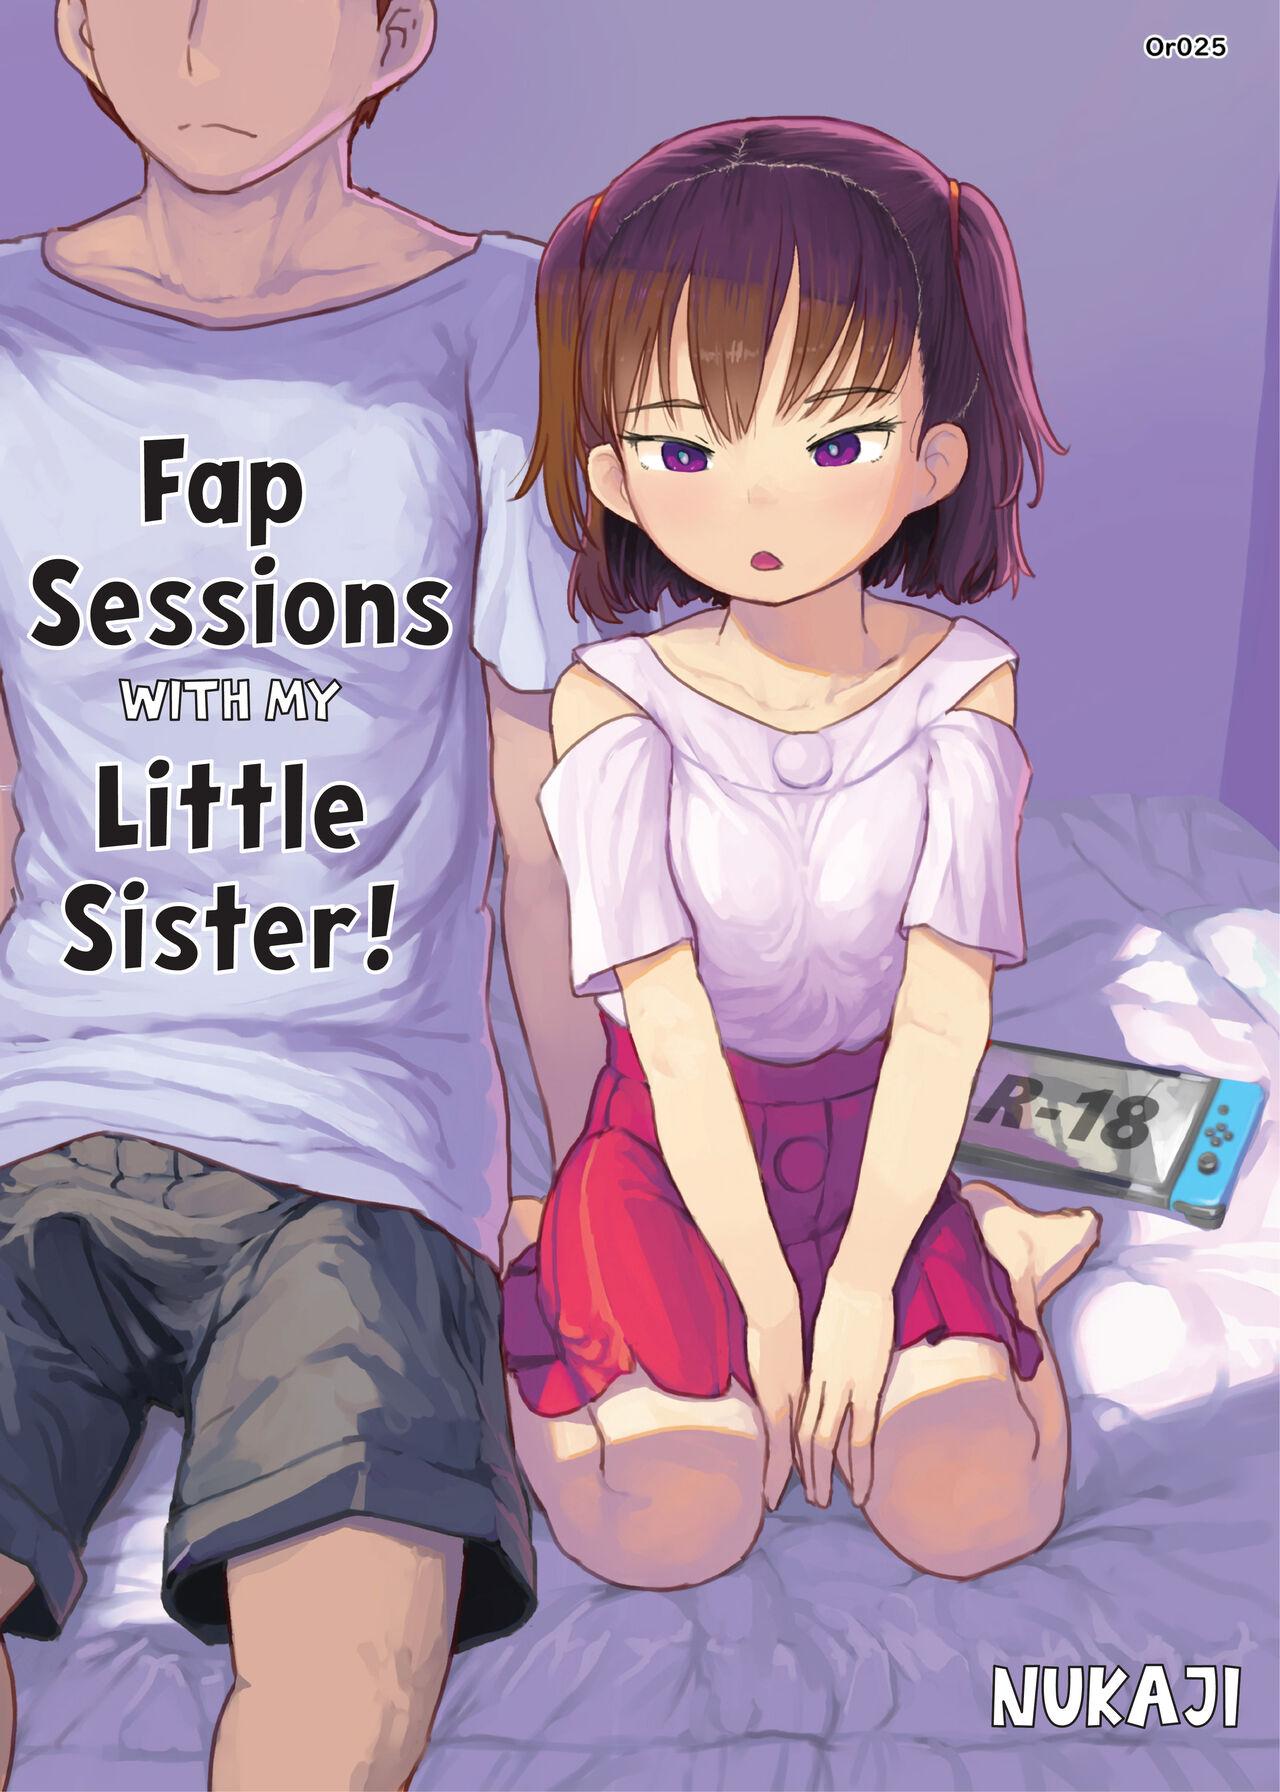 She Imouto to Nuku | Fap Sessions with my Little Sister! - Original Cumload - Picture 1